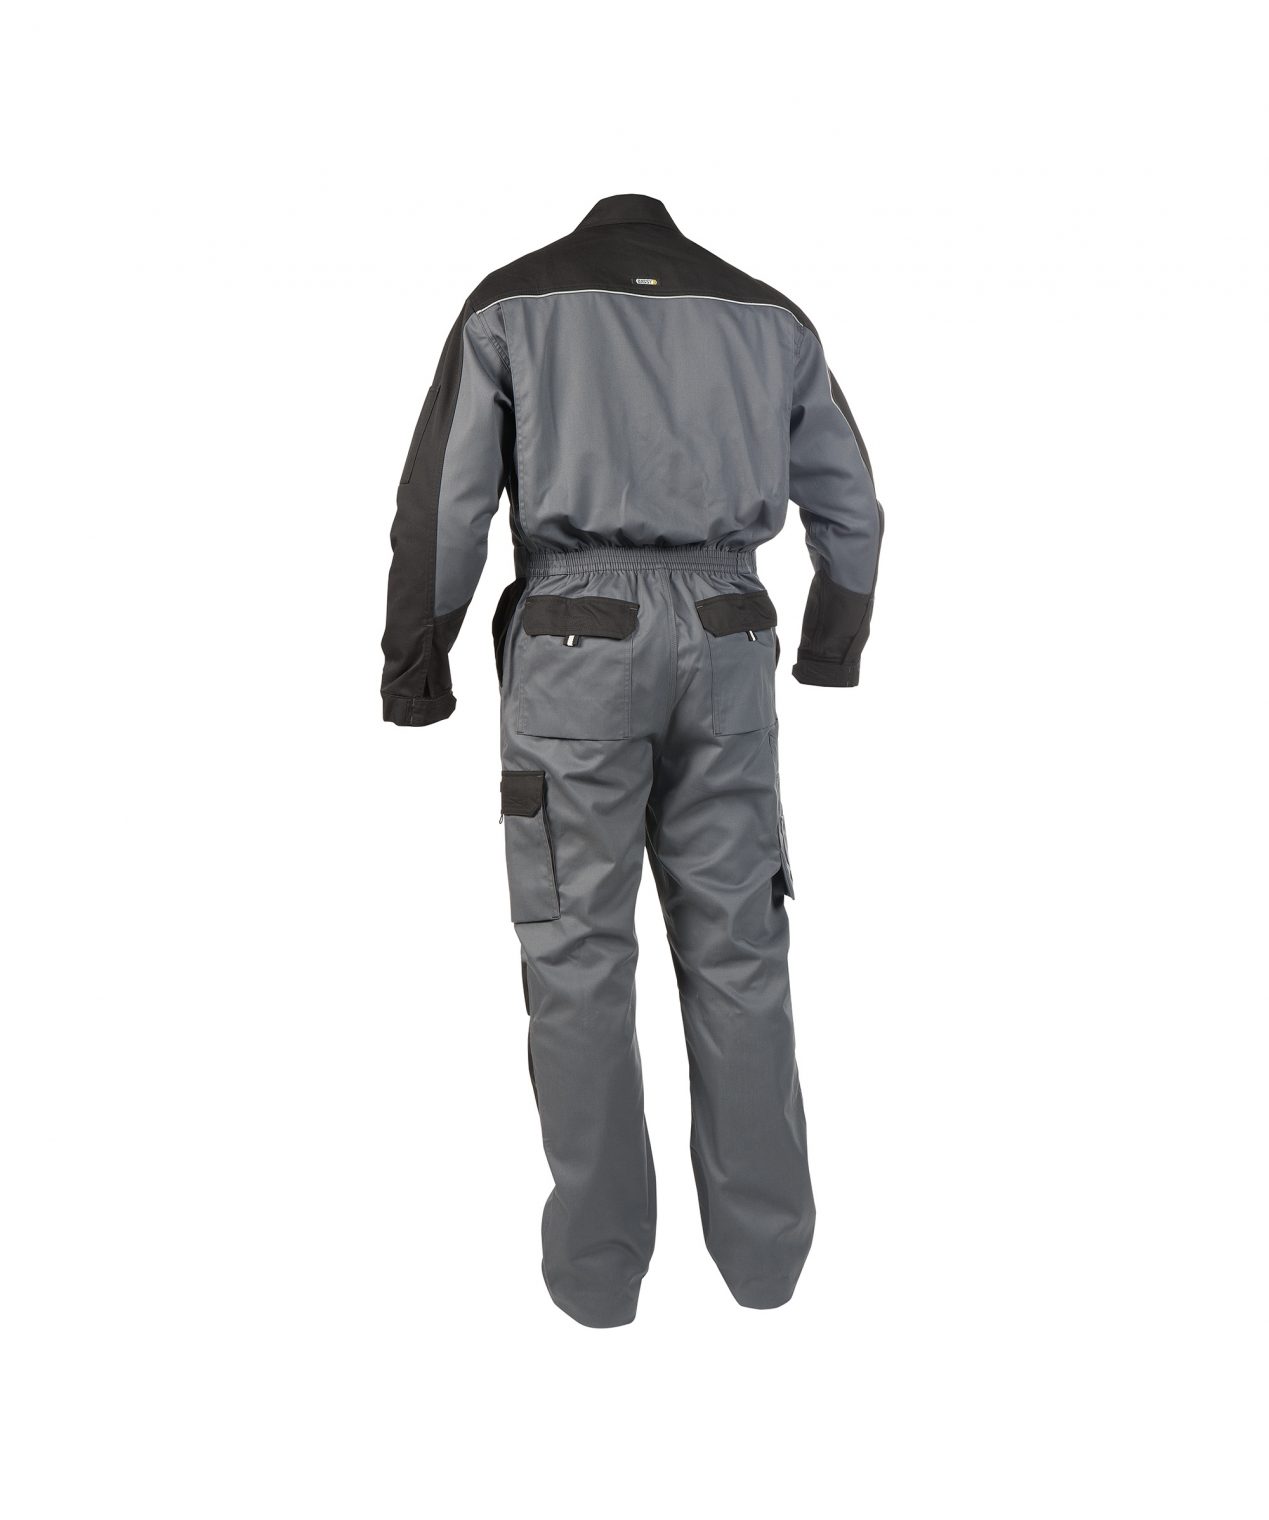 cannes two tone overall with knee pockets cement grey black back